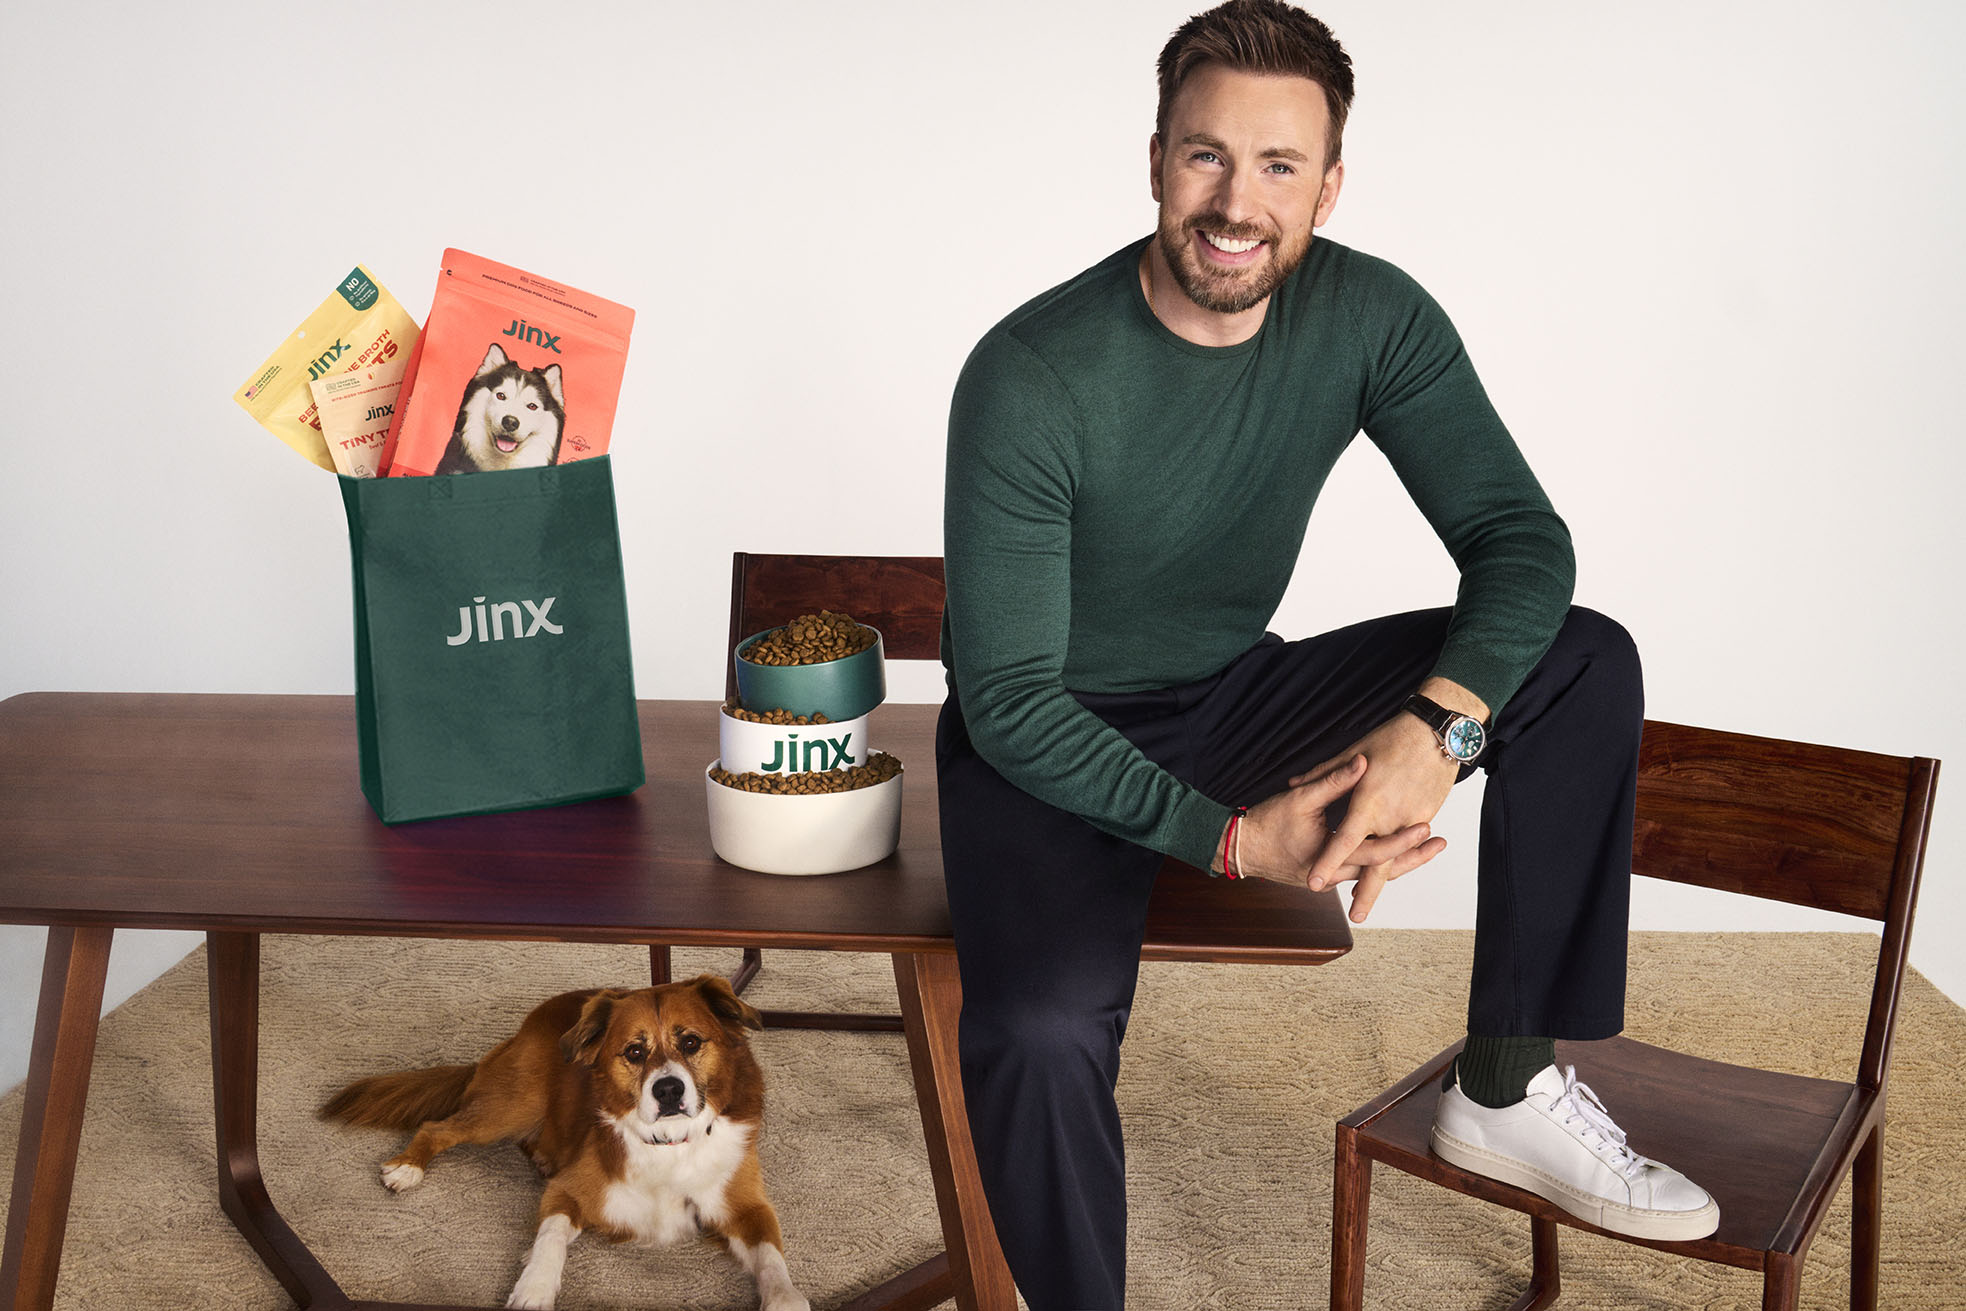 Chris Evans partnered with Jinx in August 2022